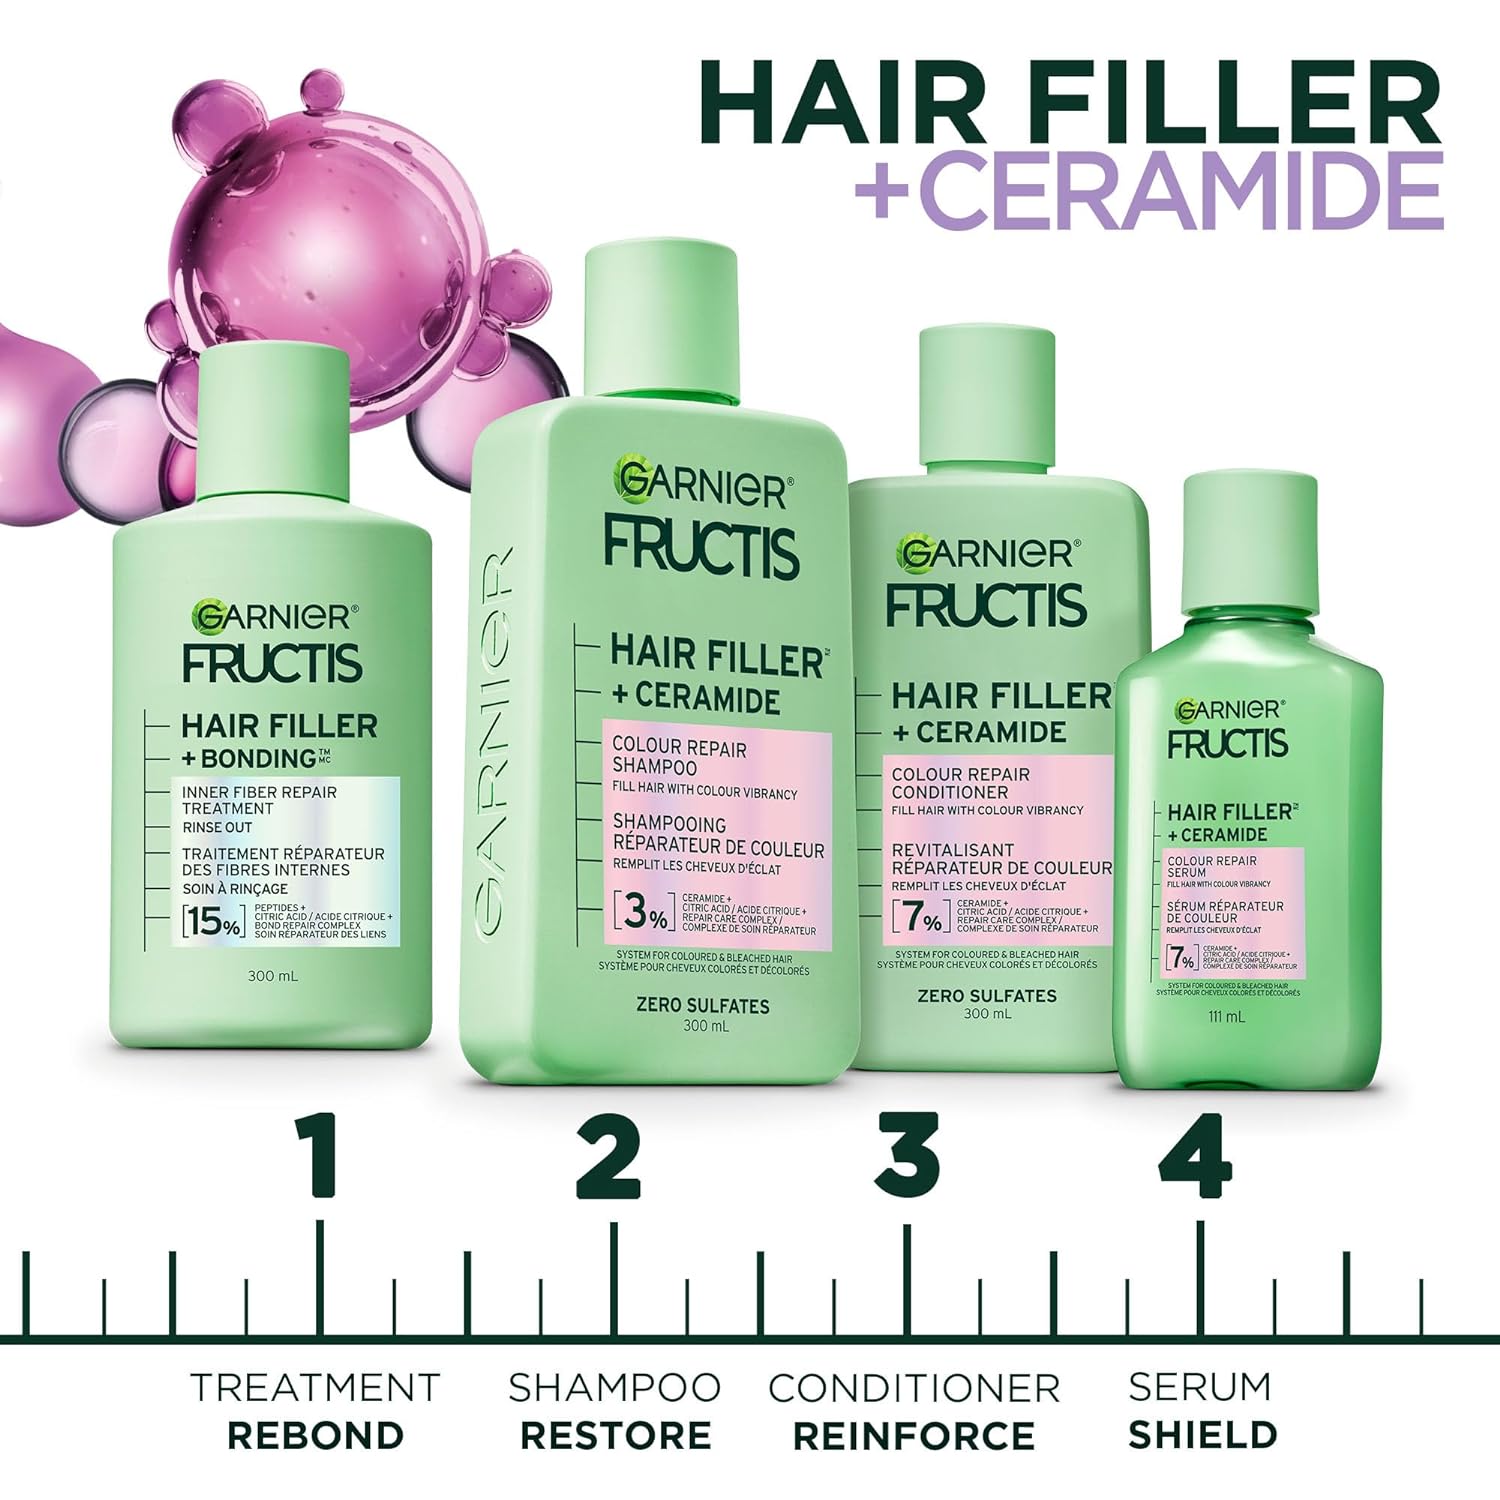 Garnier Fructis Hair Filler Color Repair Conditioner with Ceramide, 10.1 FL OZ, 1 Count : Beauty & Personal Care